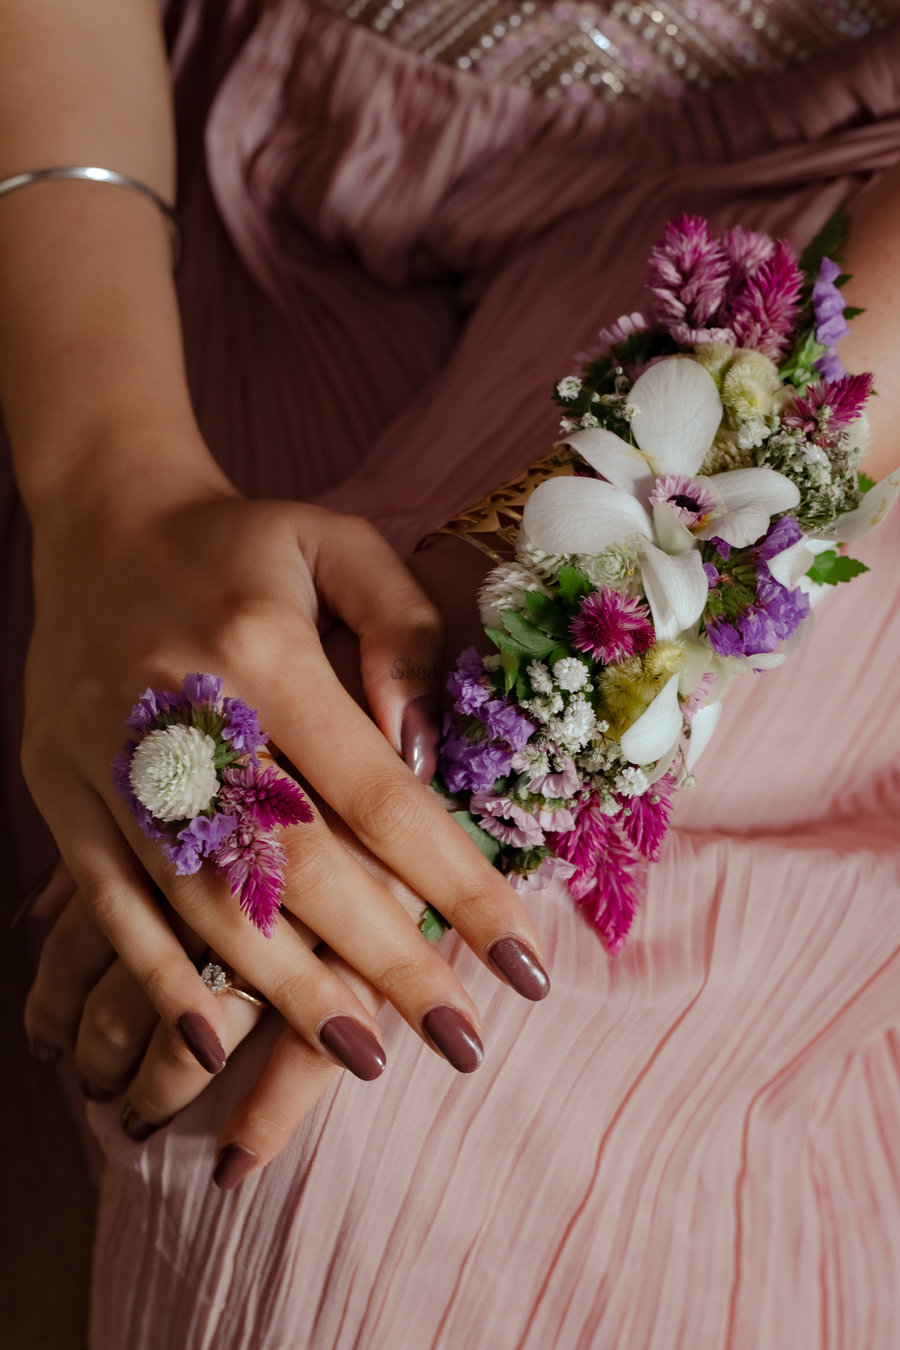 Bridal Jewellery Trends Setting In For 2023